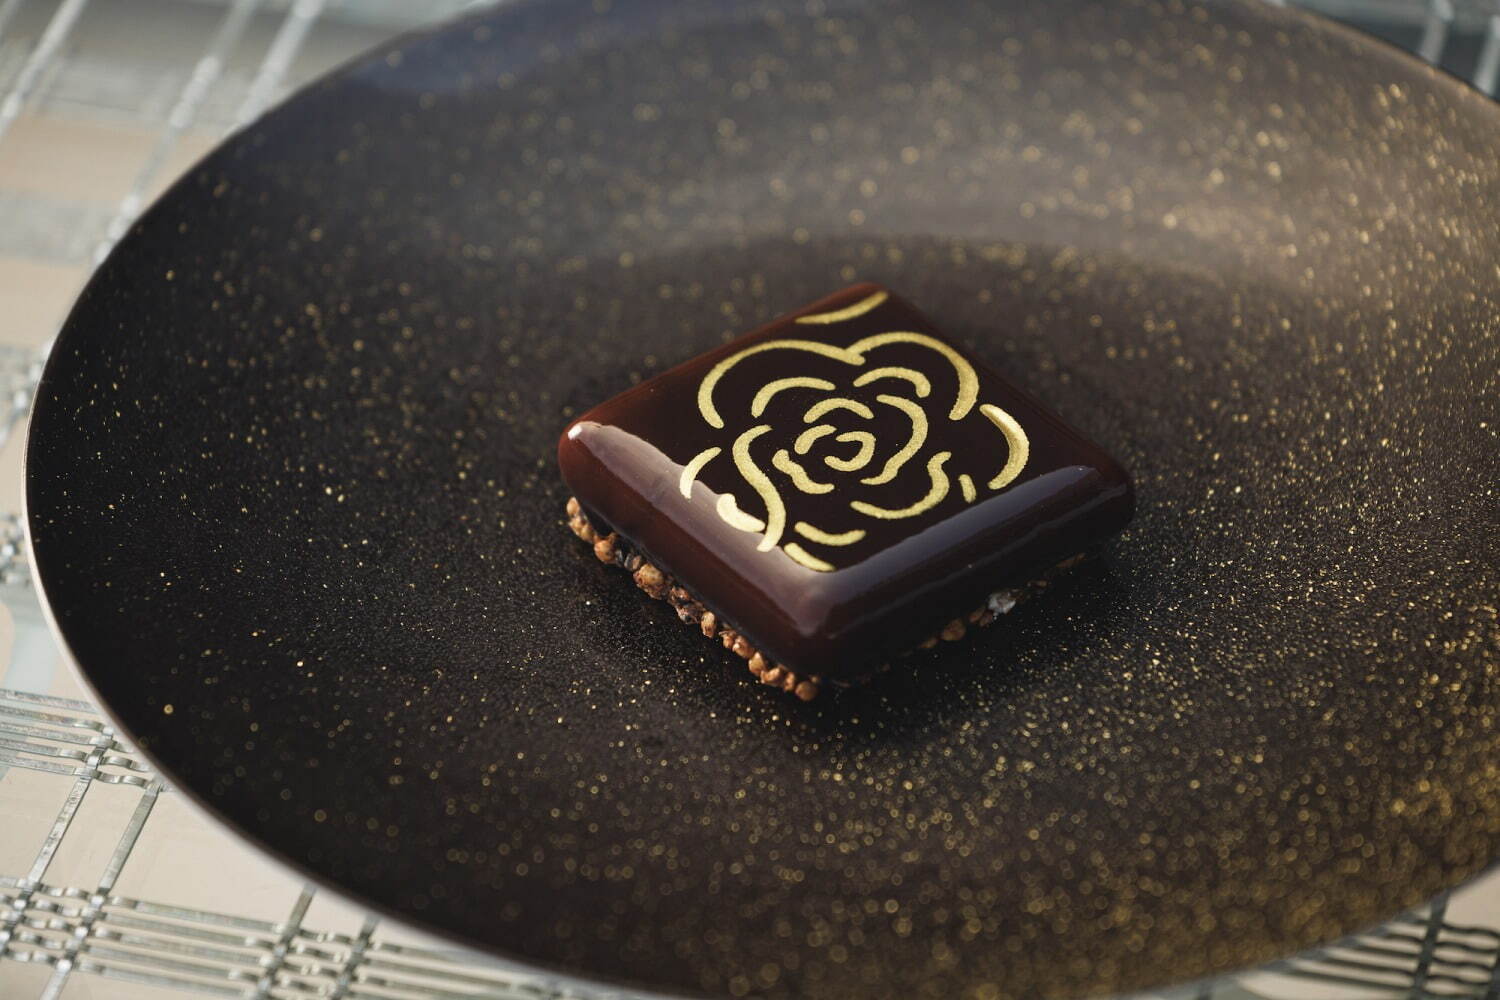 Experience the World of CHANEL Through Dessert at New Ginza Cafe